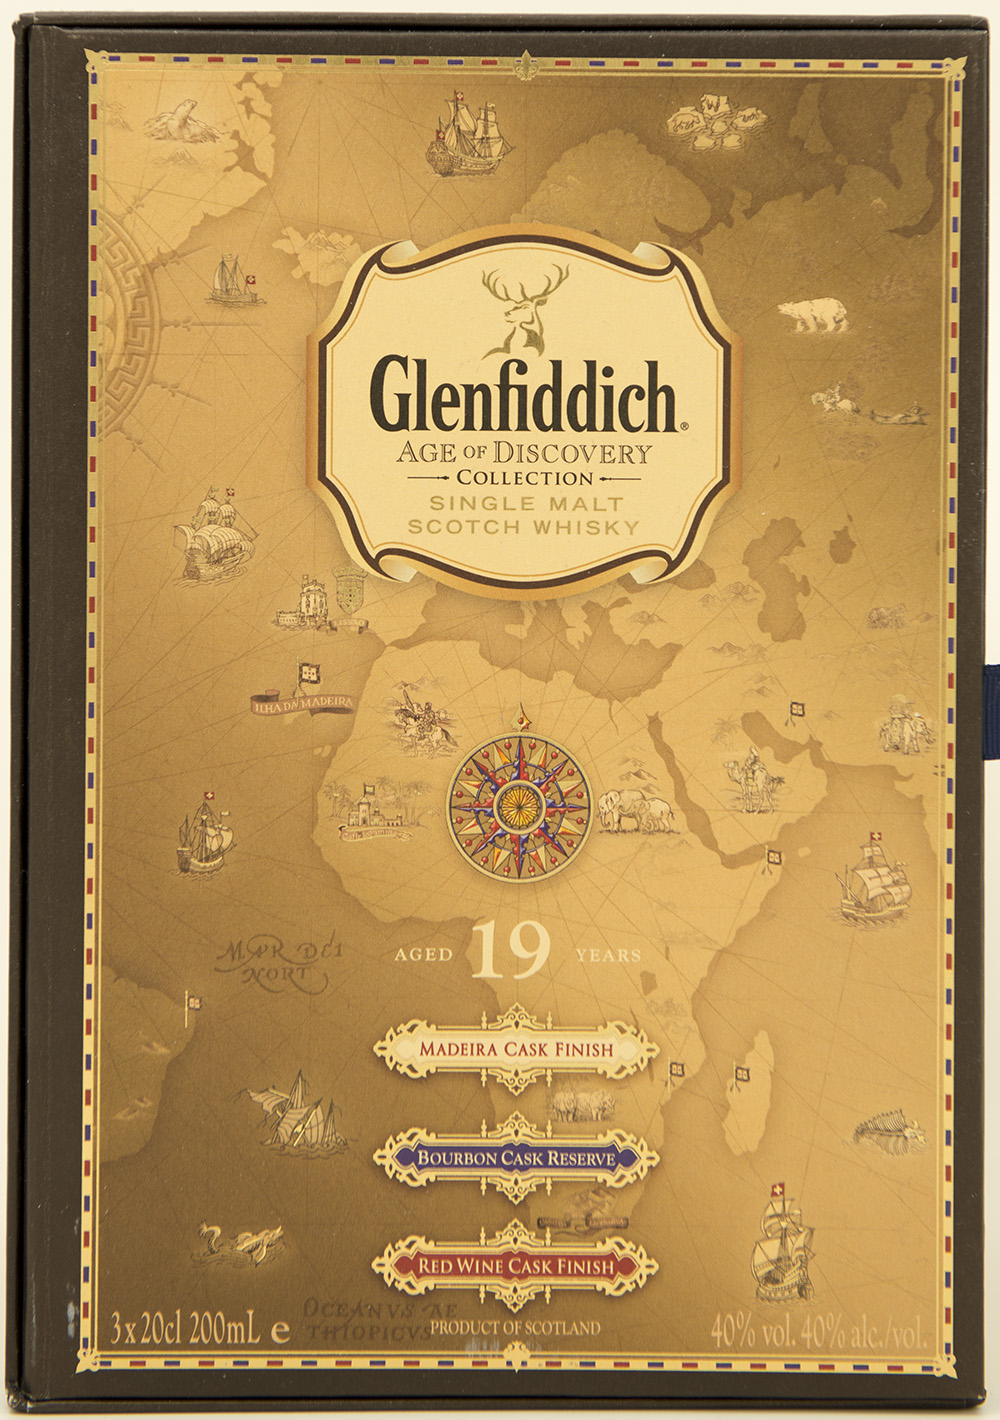 Billede: DSC_3723 - Glenfiddich - Age of Discovery Collection (box front).jpg